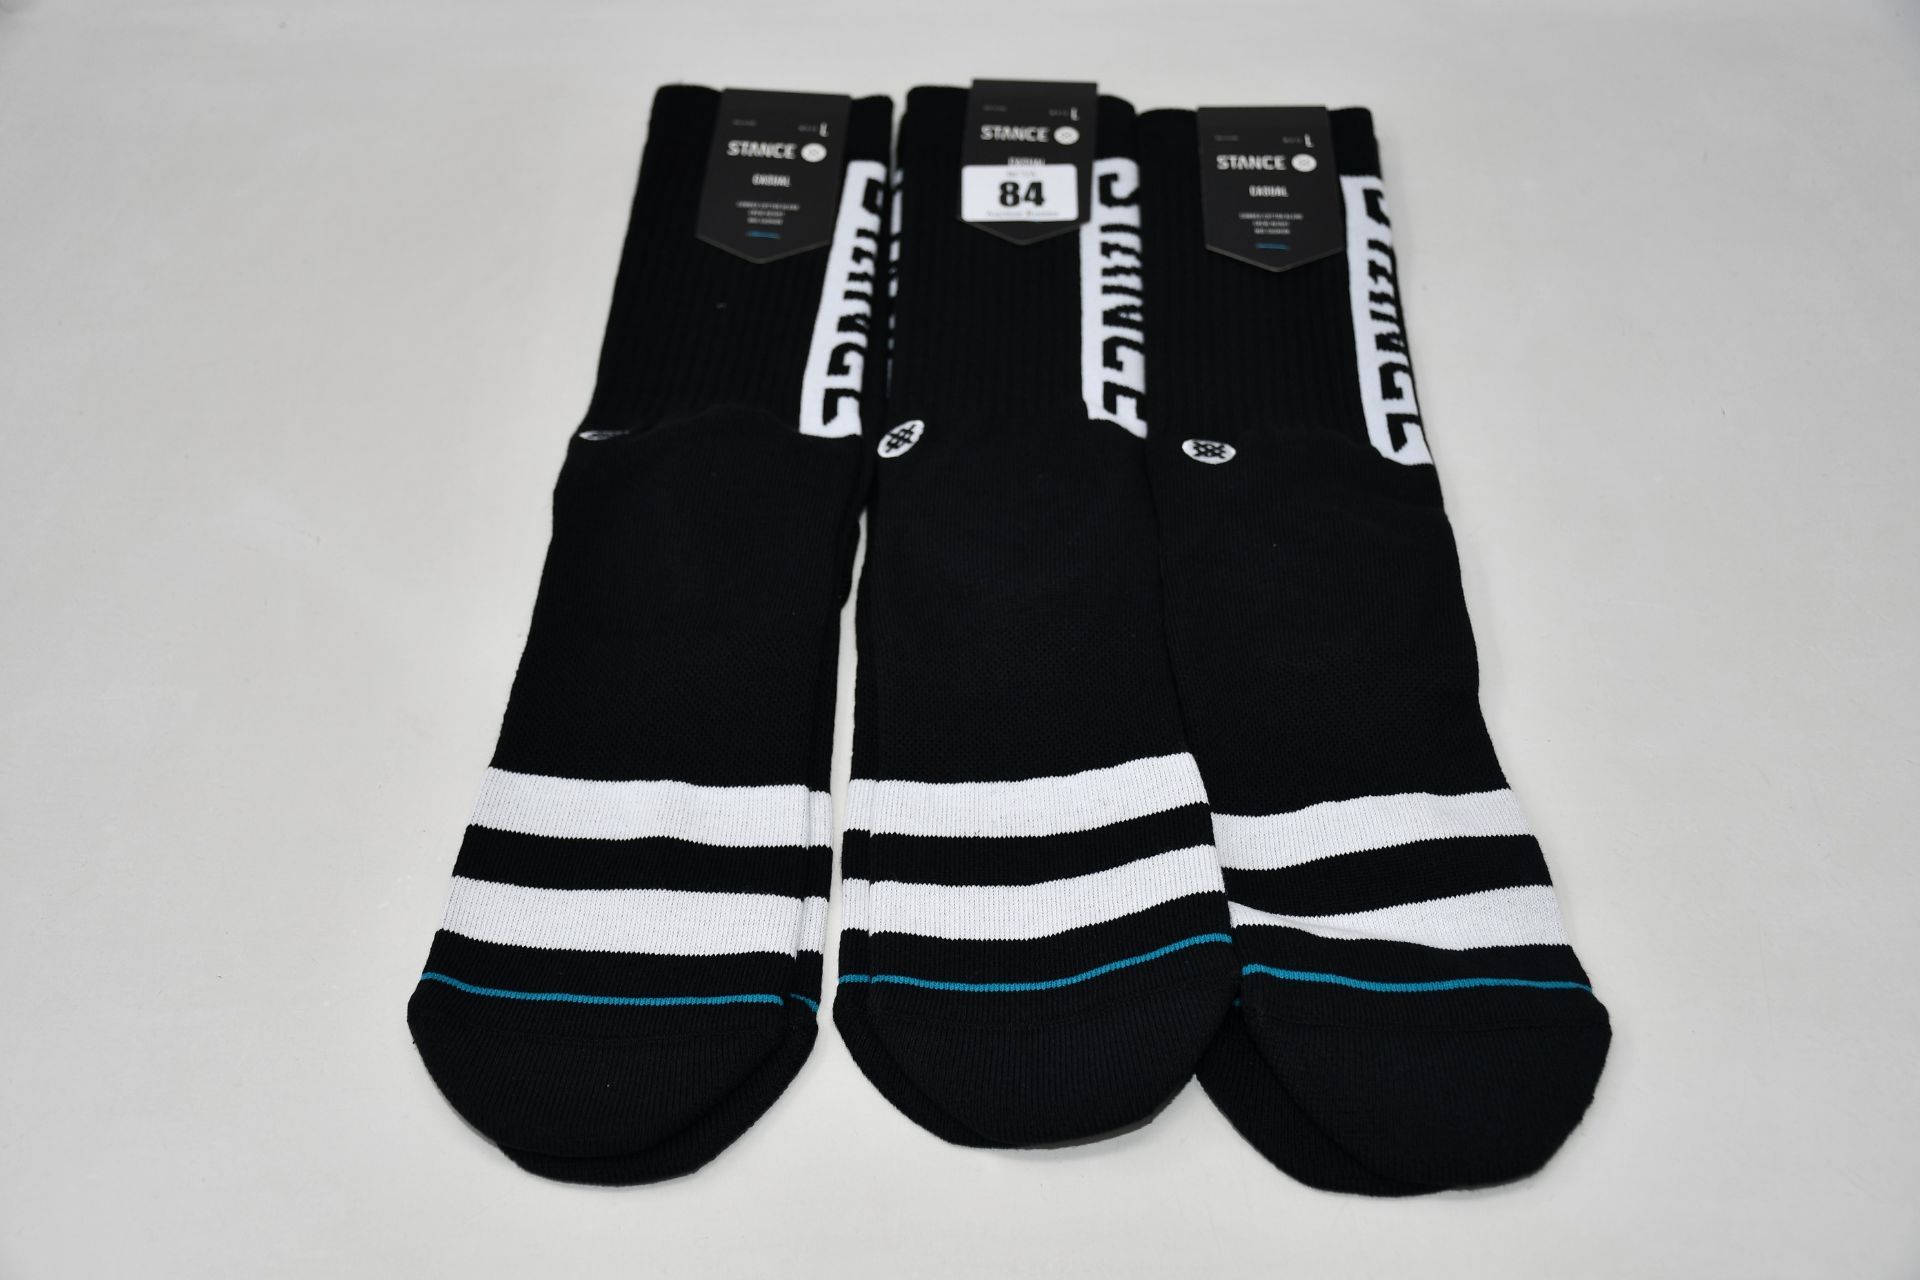 Eighteen pairs of as new Stance OG socks (All L - RRP £9 per pair).